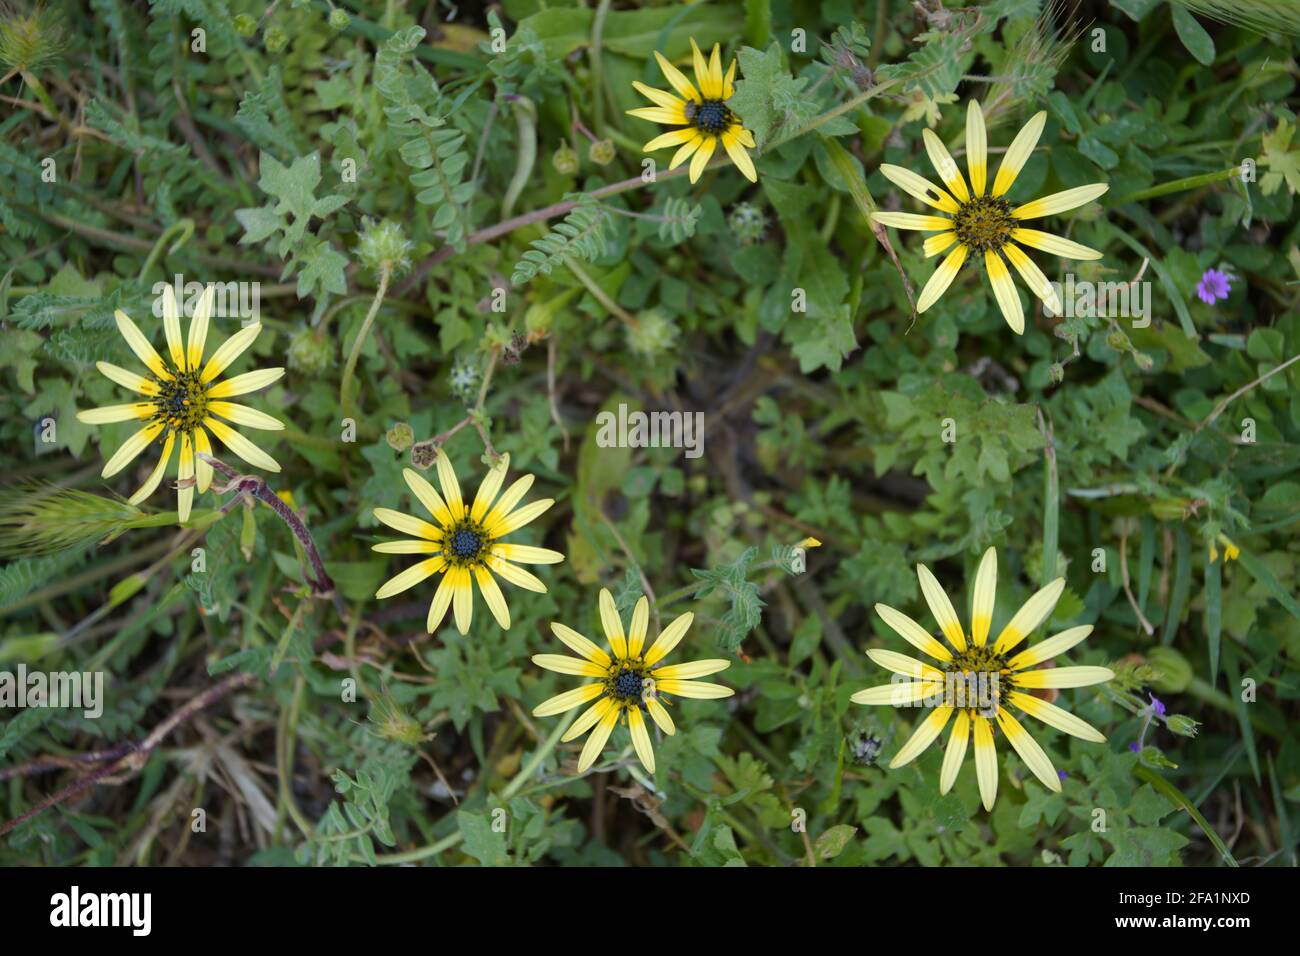 A cluster of Golden Aster flowers in a garden Stock Photo